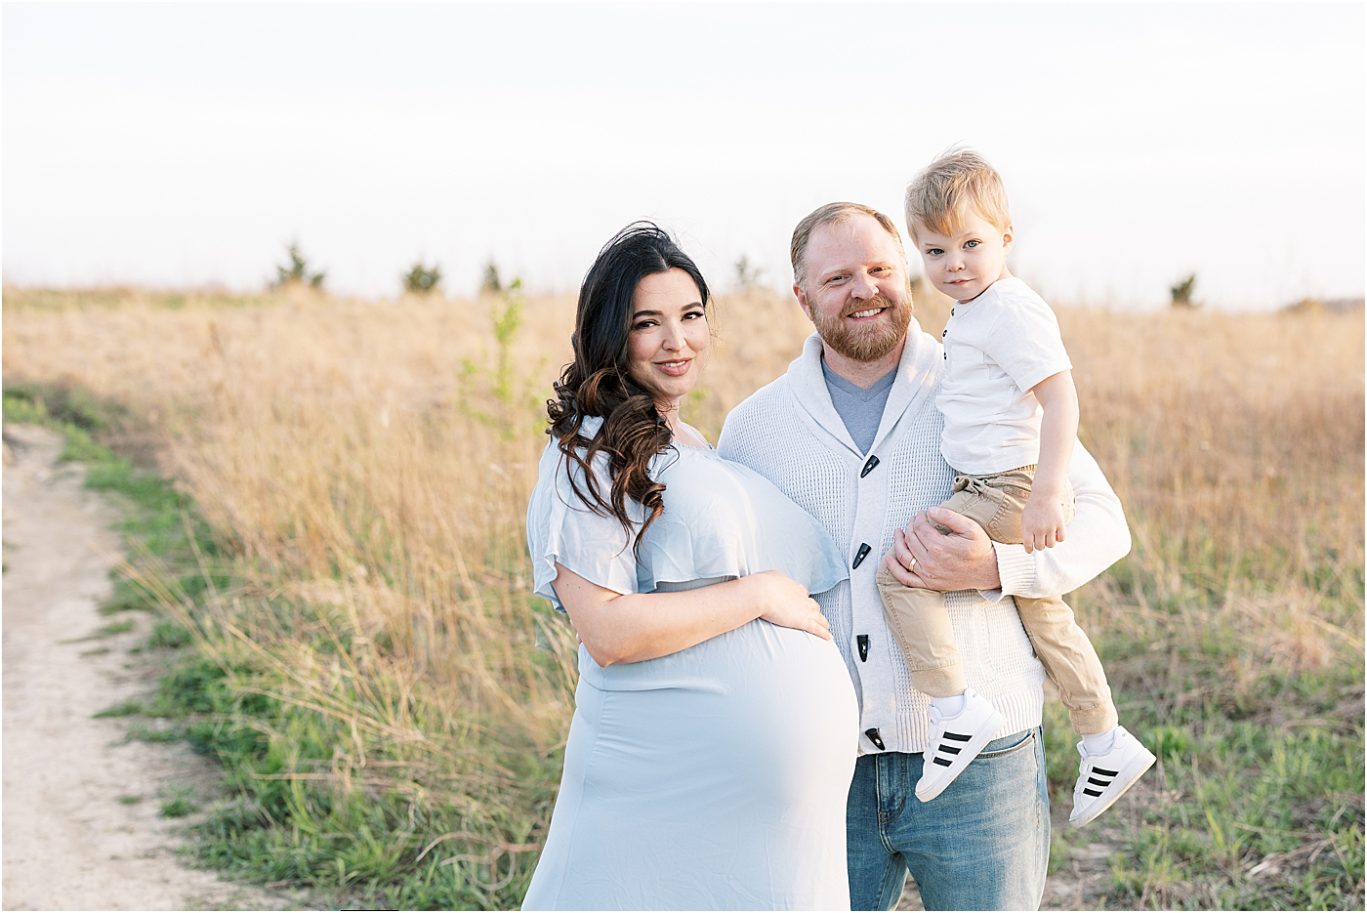 Outdoor maternity session in Fishers with Indianapolis maternity photographer, Lindsay Konopa Photography.